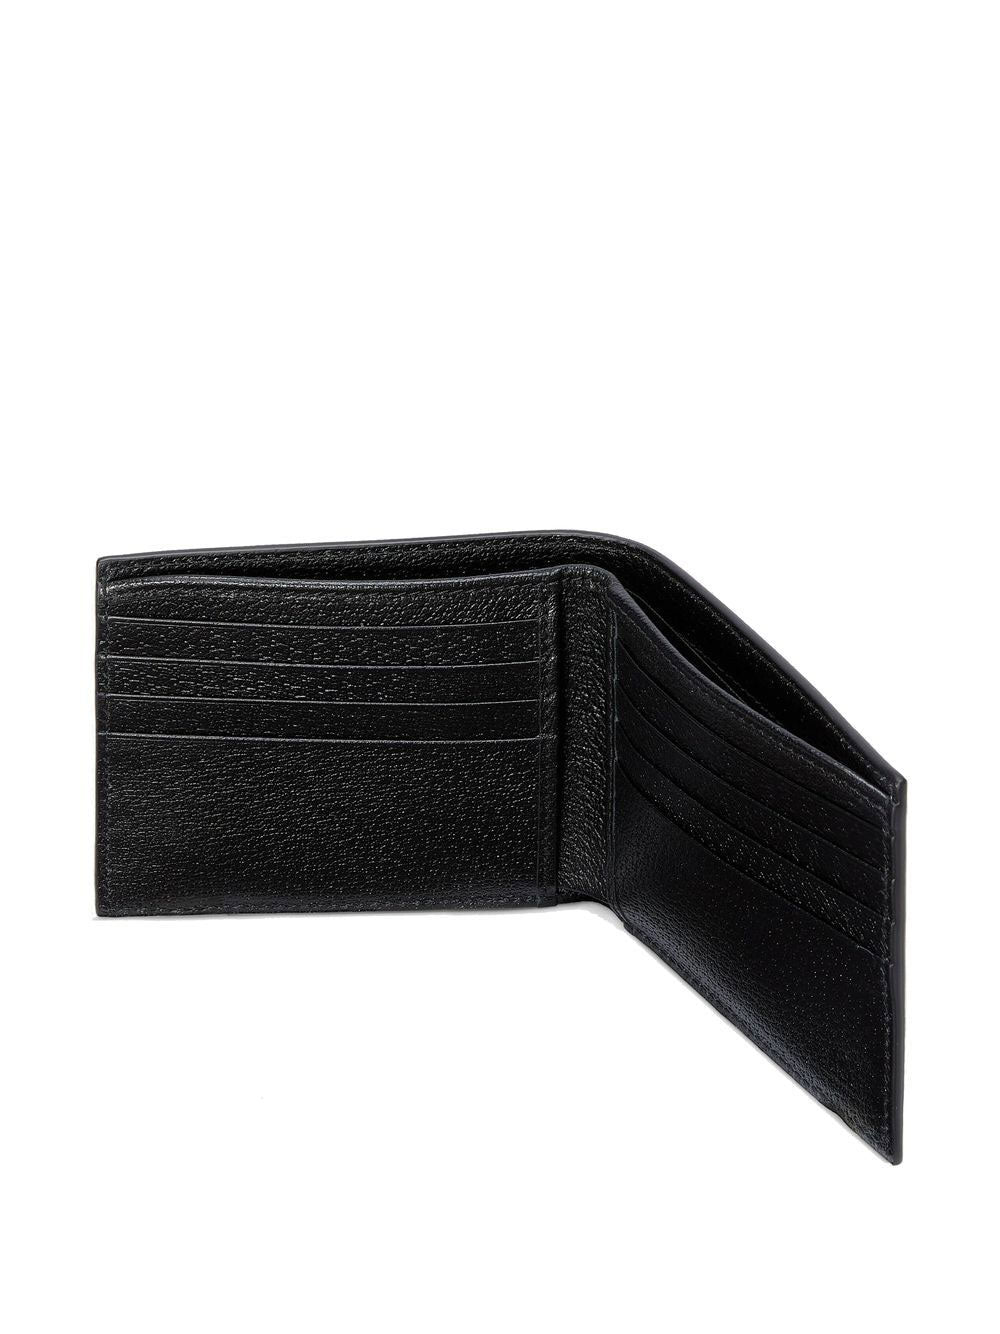 GG Marmont foldover wallet